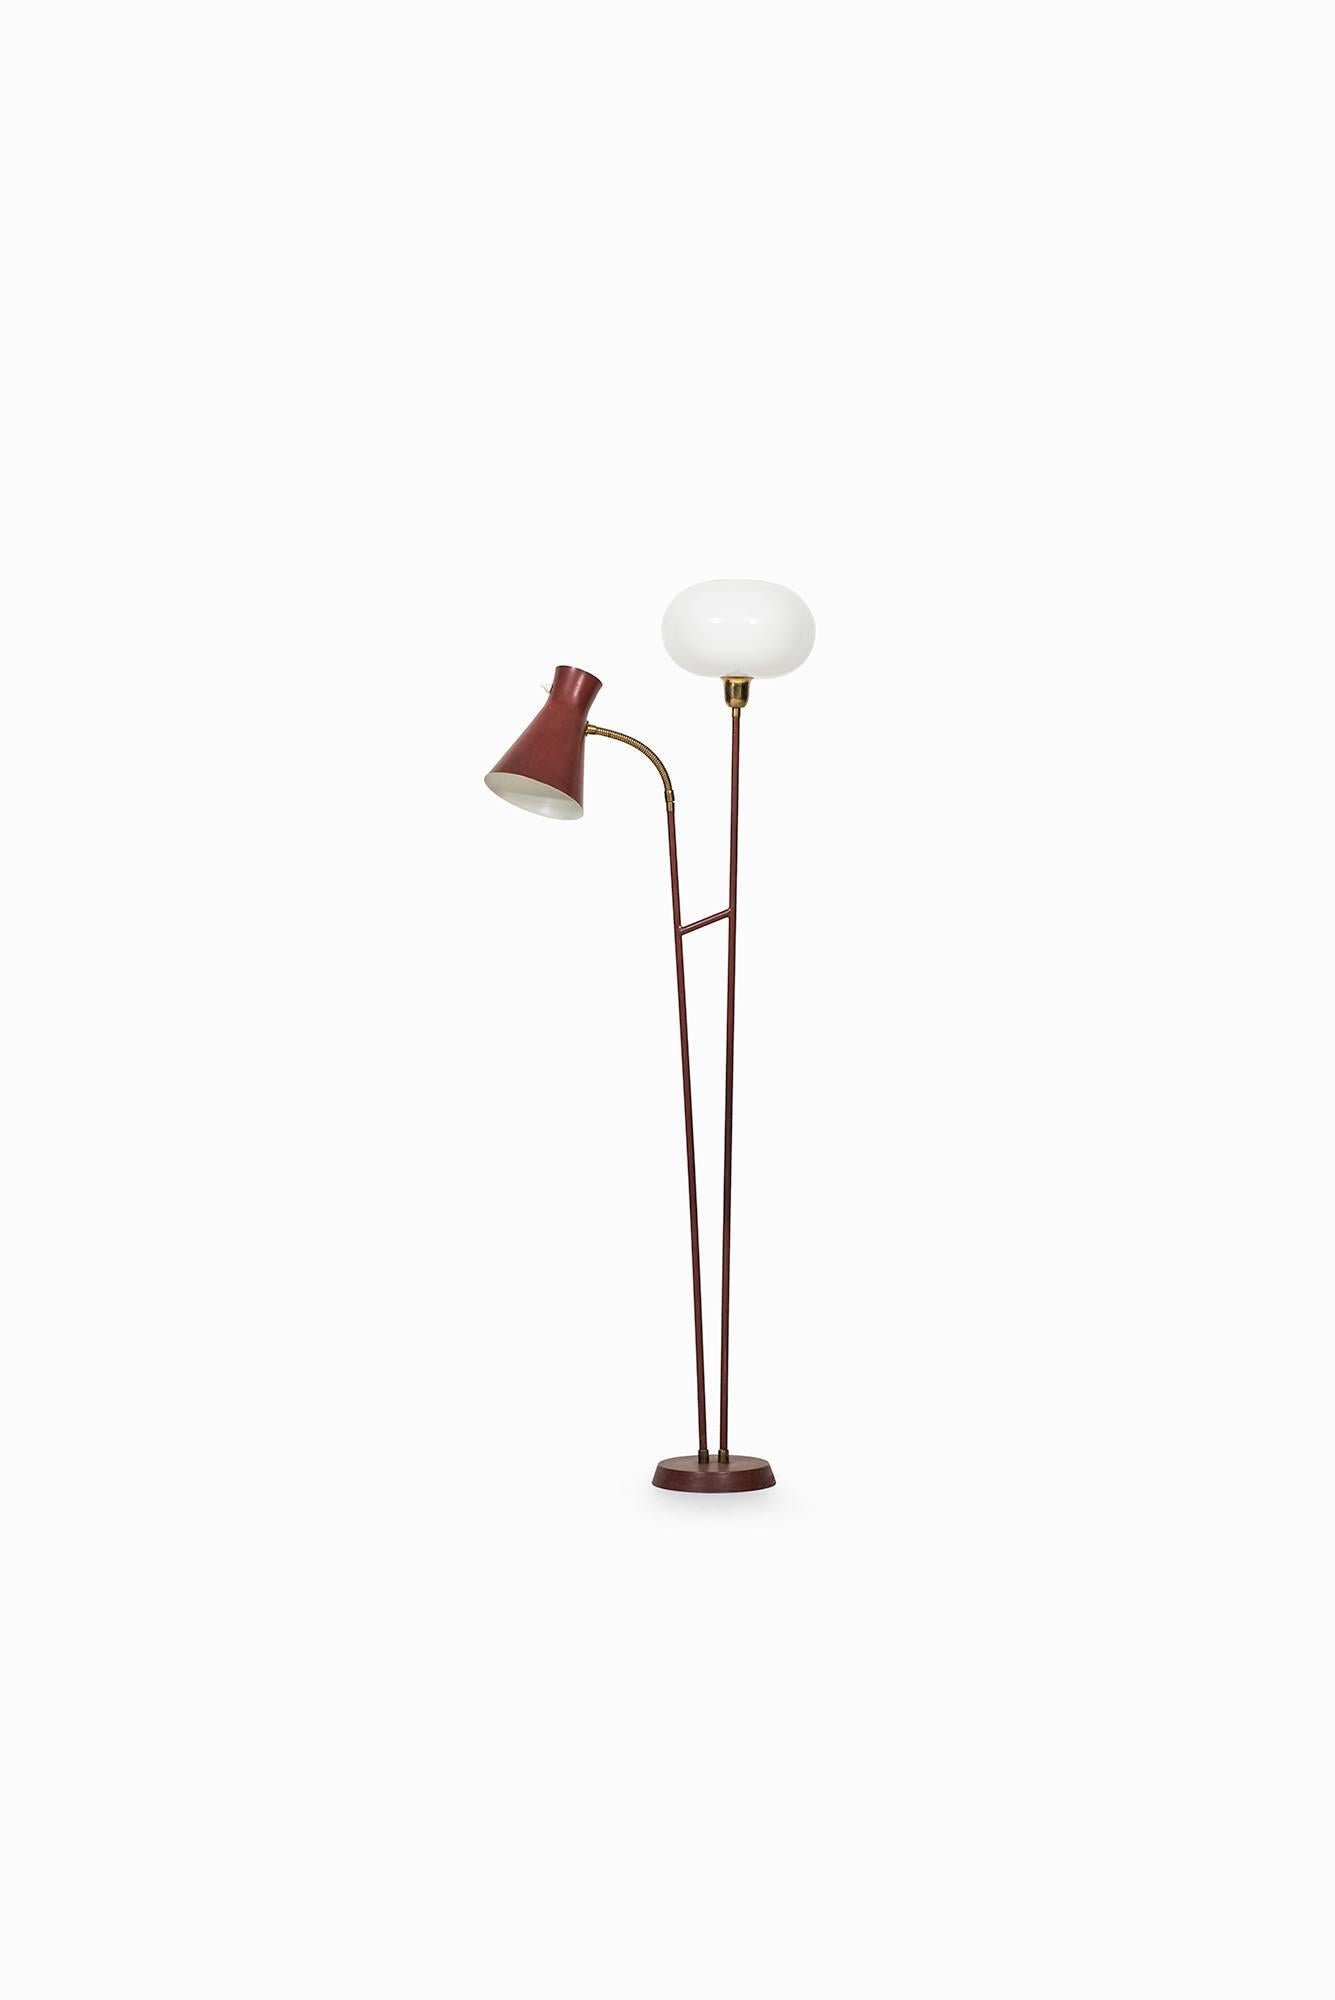 Floor lamp in the manner of Hans Bergström. Produced in Sweden.